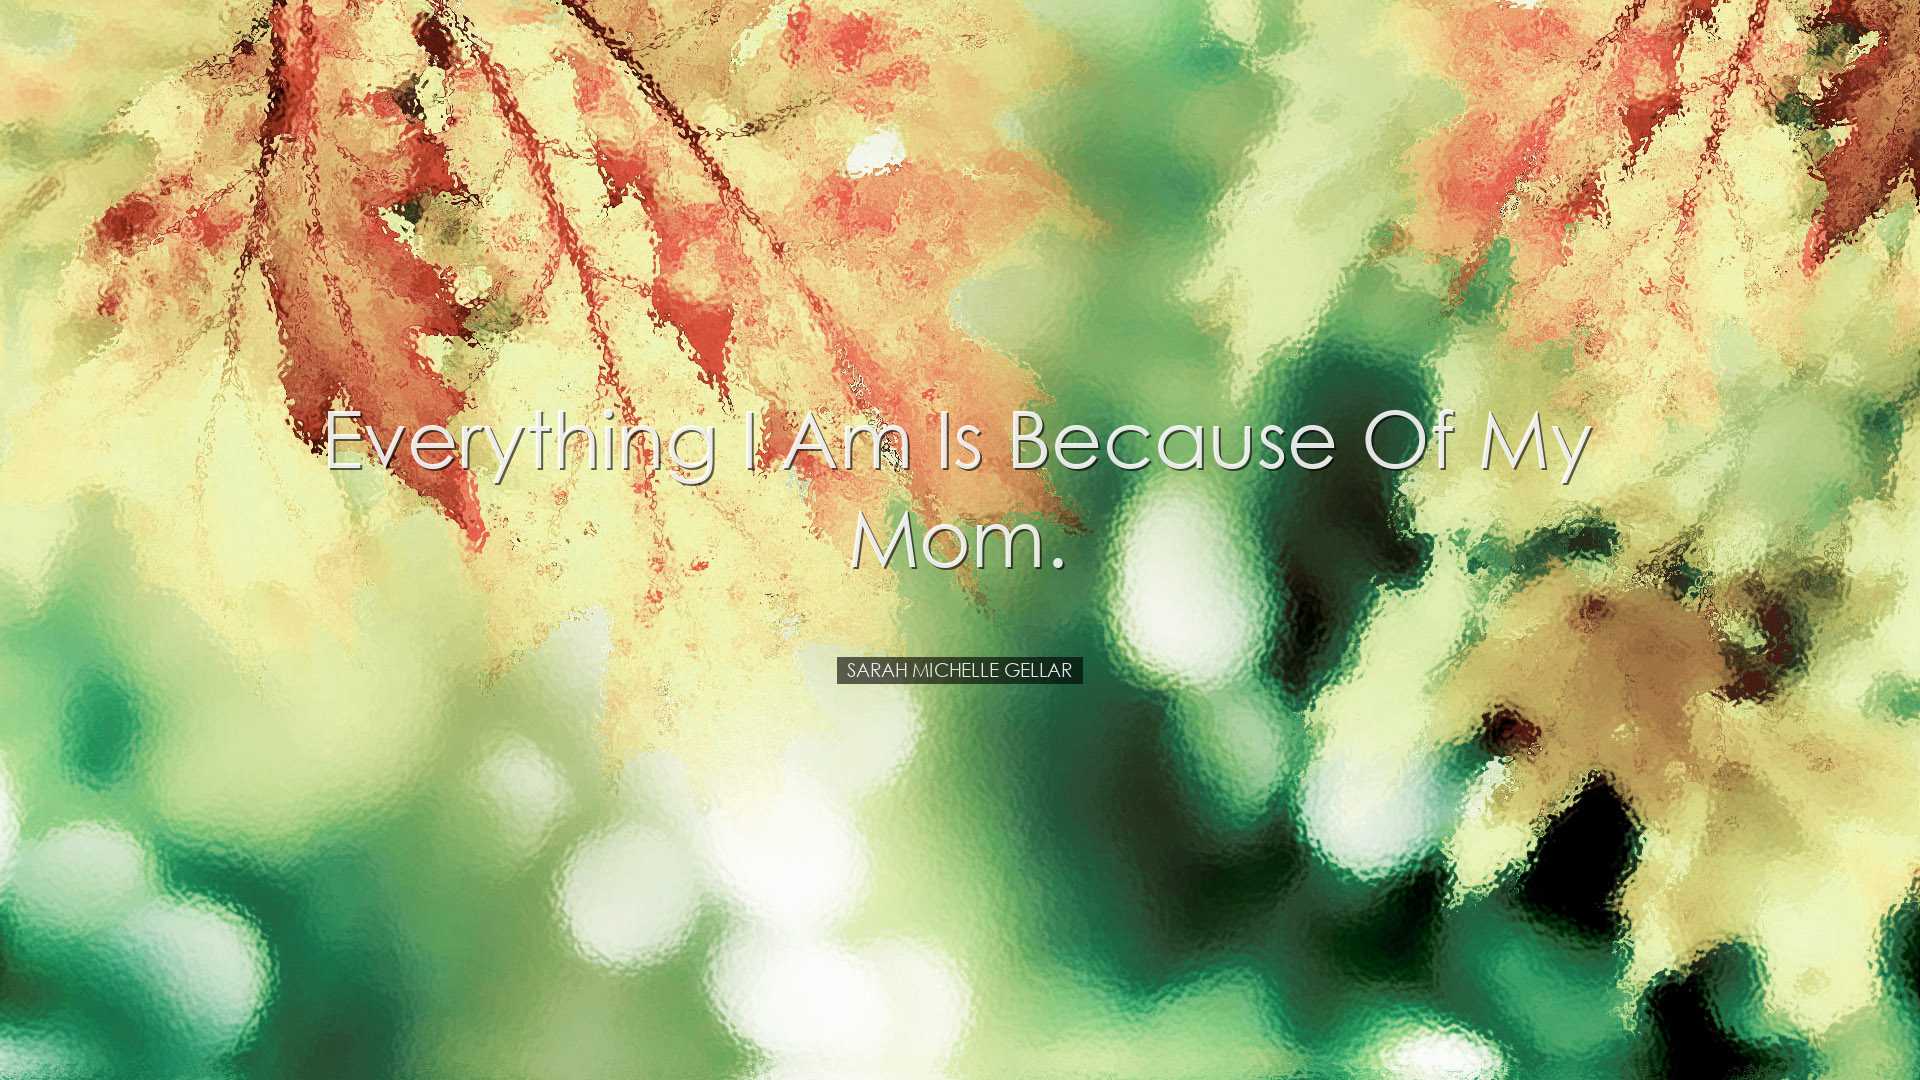 Everything I am is because of my mom. - Sarah Michelle Gellar